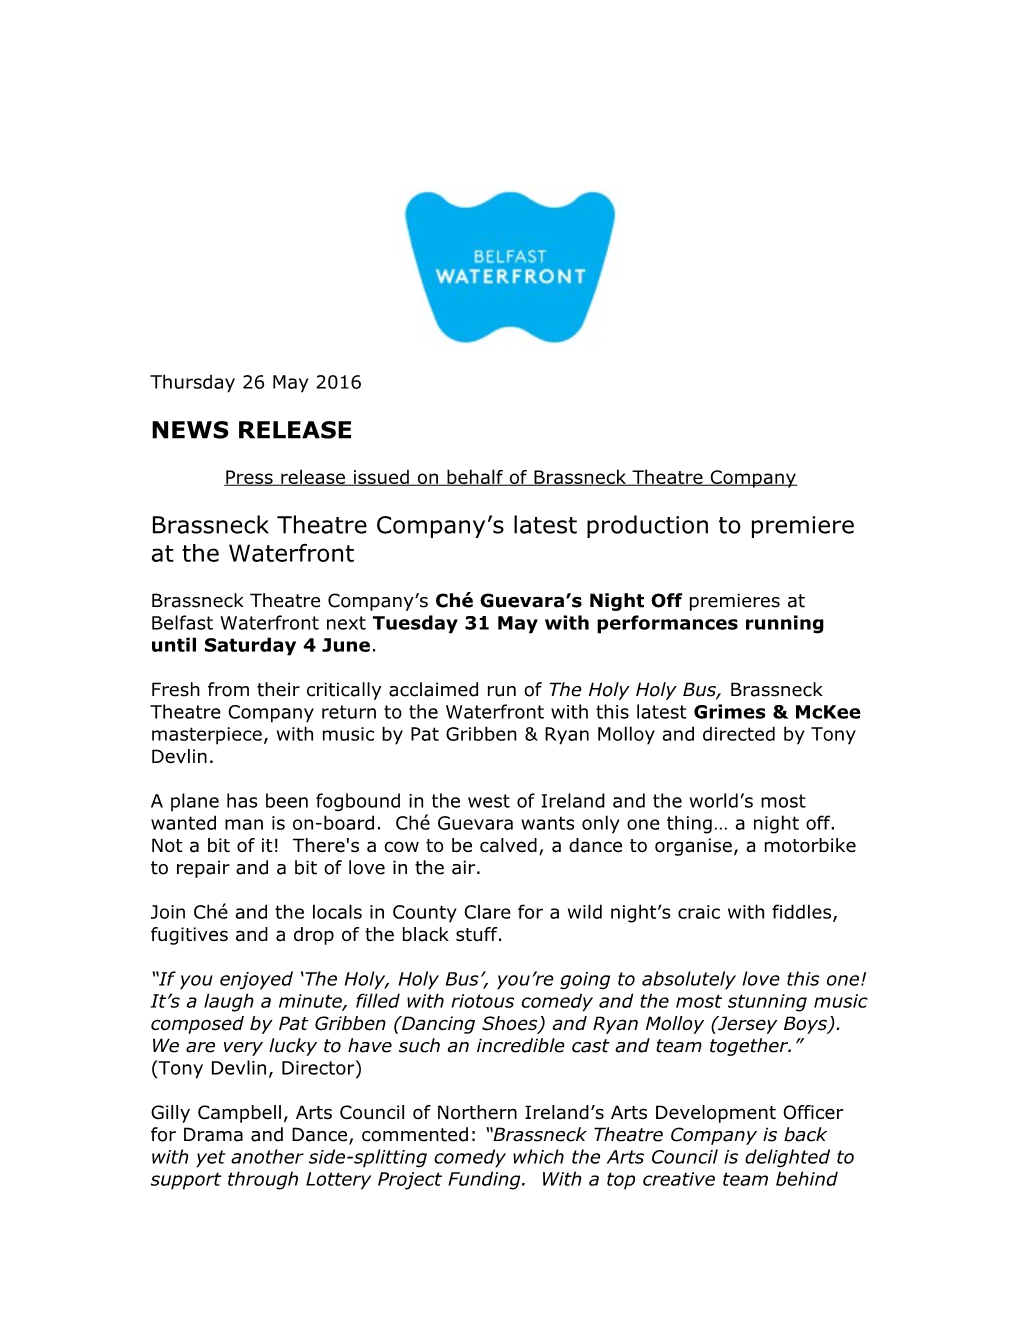 Press Release Issued on Behalf of Brassneck Theatre Company